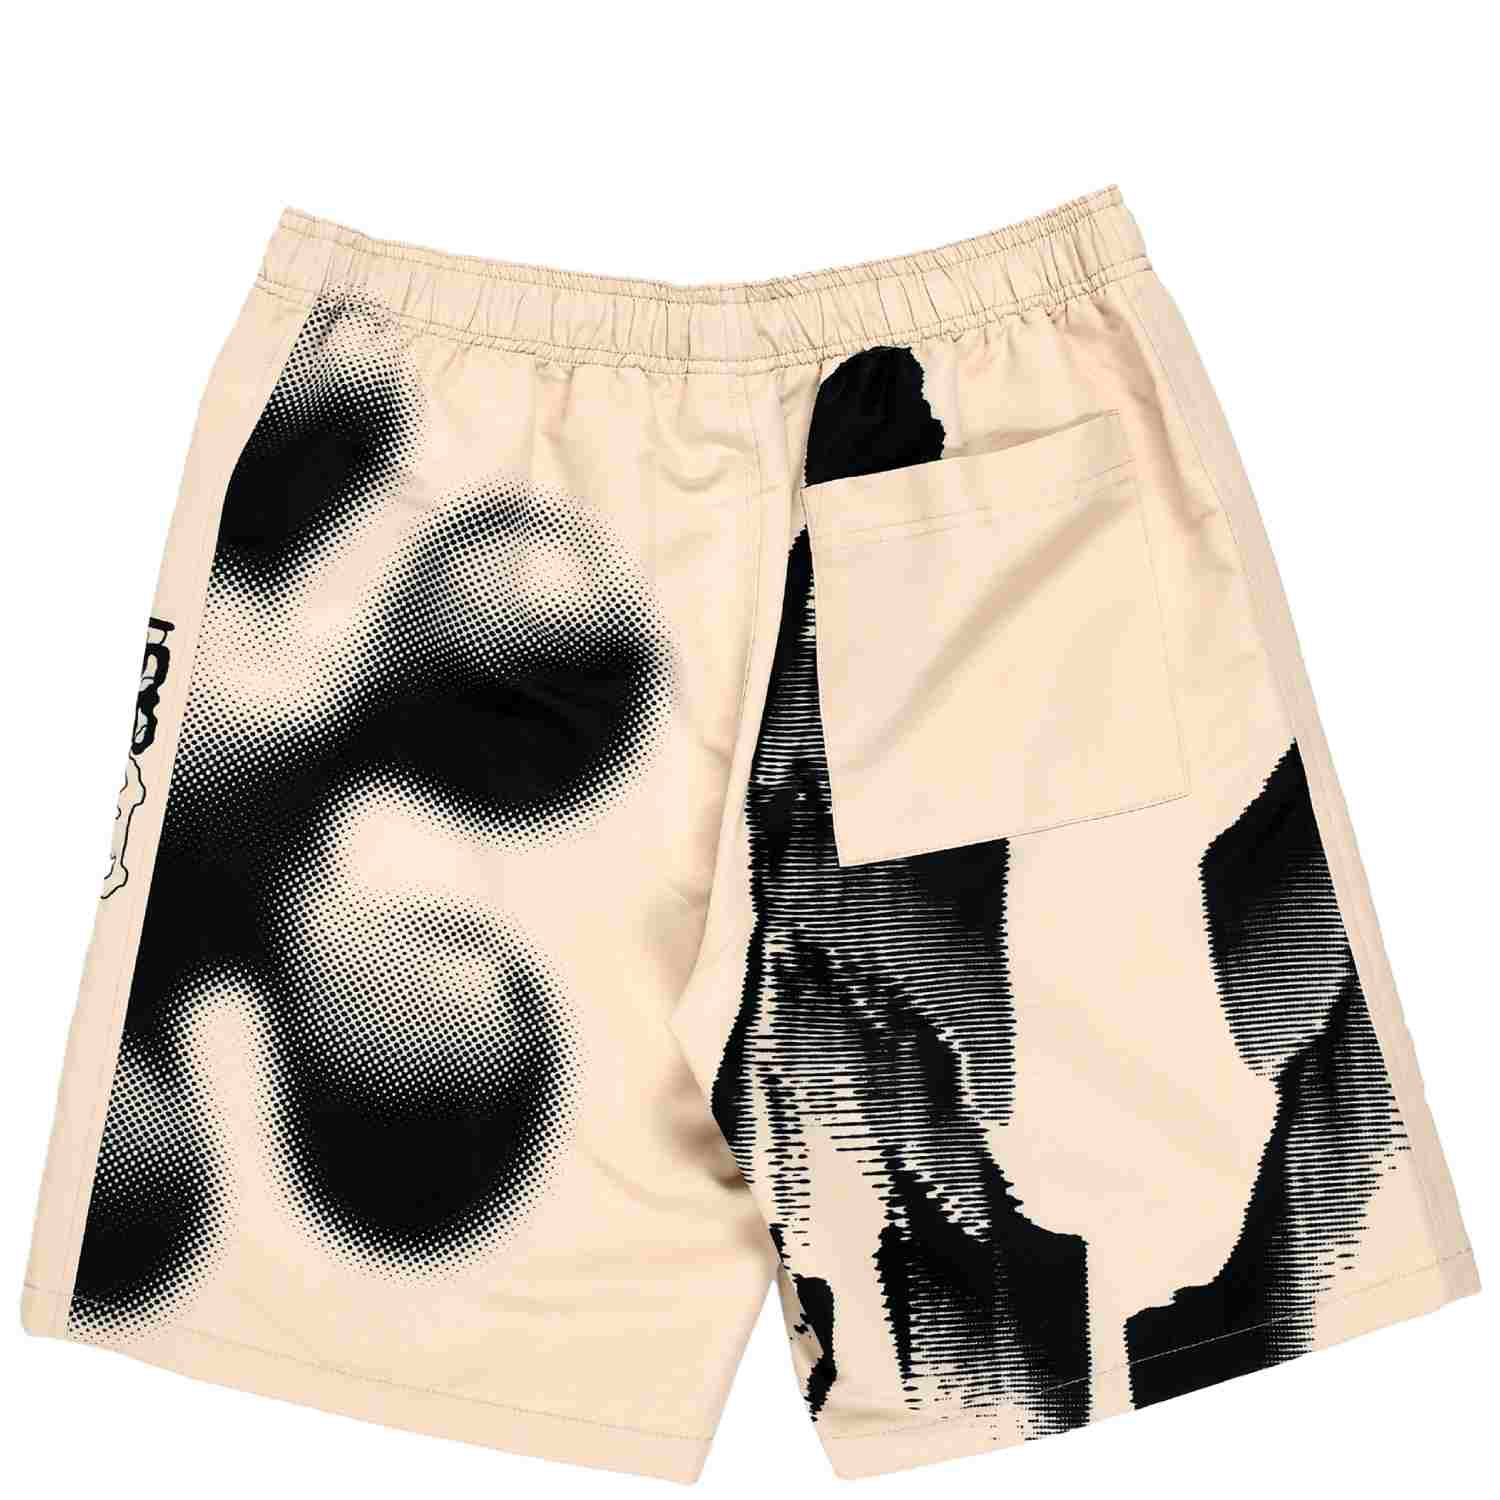 Quasi - Storm Short - Bone swim trunks in cream color with distorted image of a face and sun printed in black.